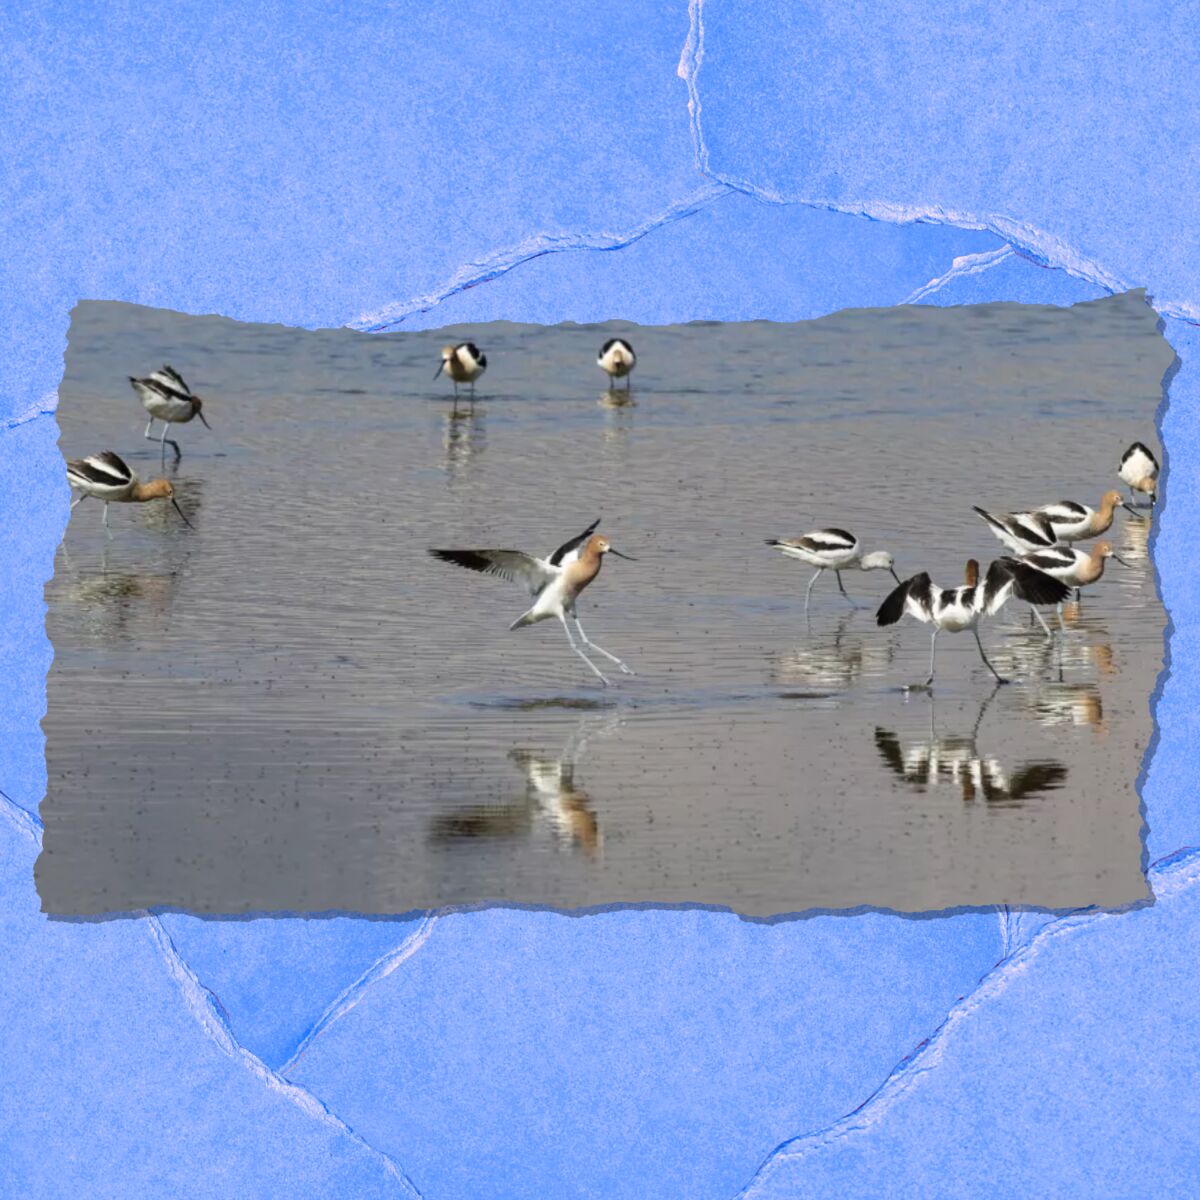 Birds with distinctive black and white feathers are shown in shallow water.